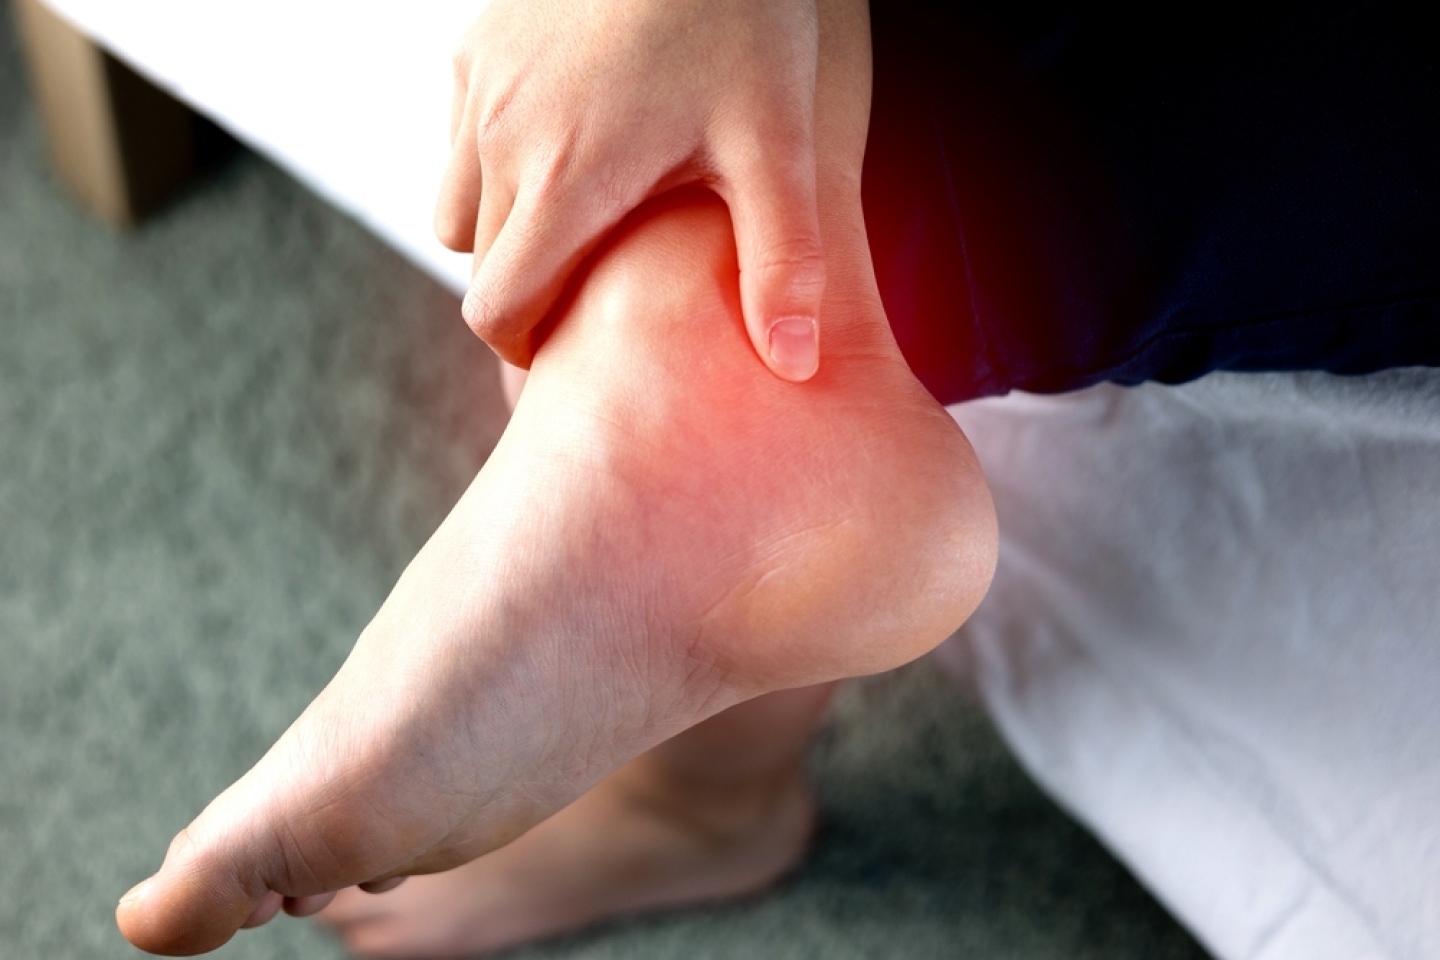 Sever's Disease or an Achilles Strain: How to Tell the Difference